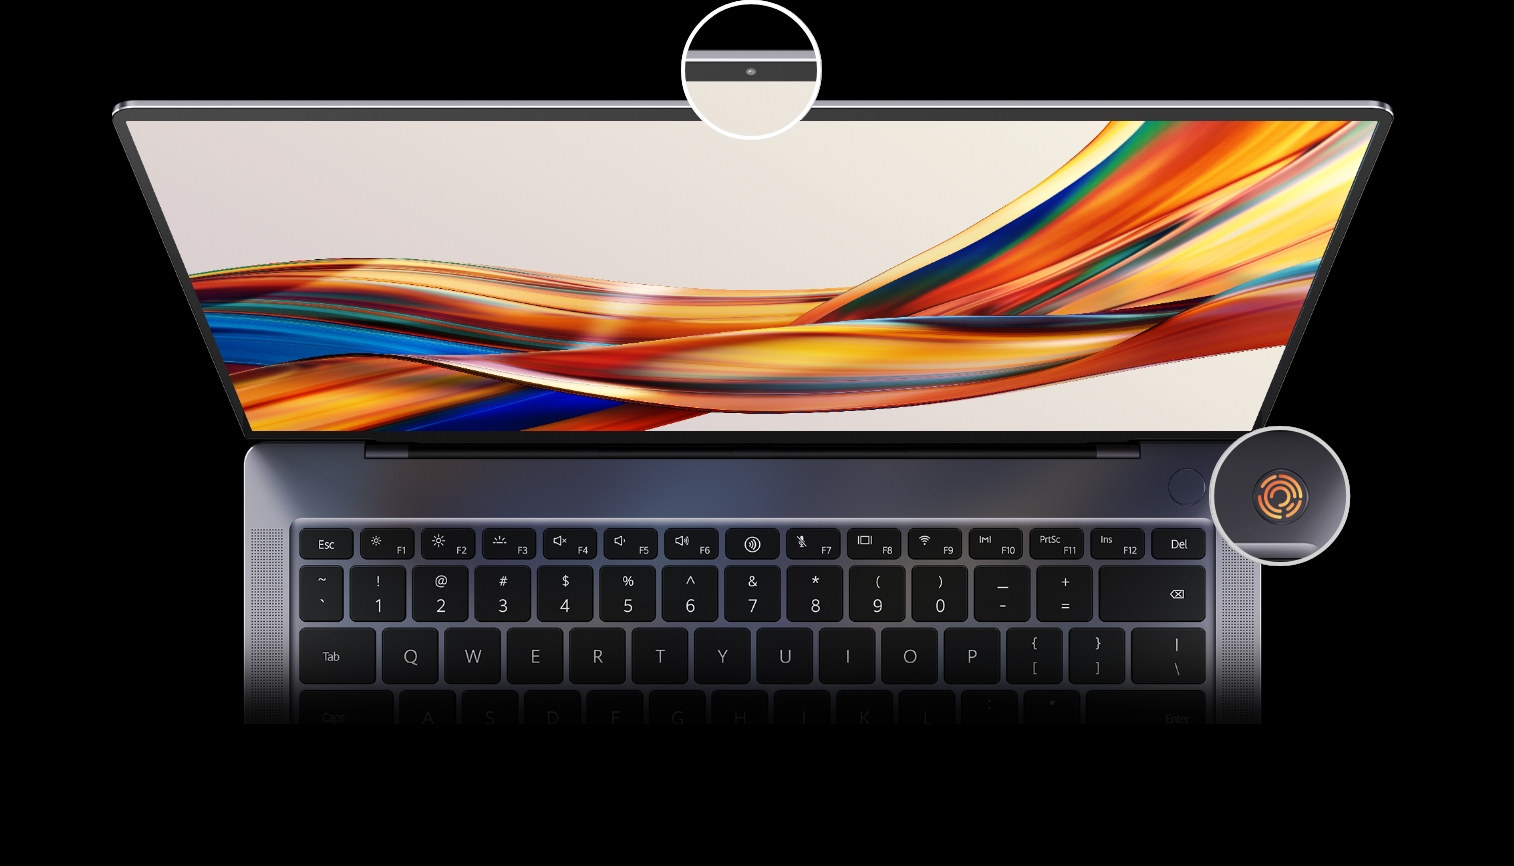 huawei matebook x pro features